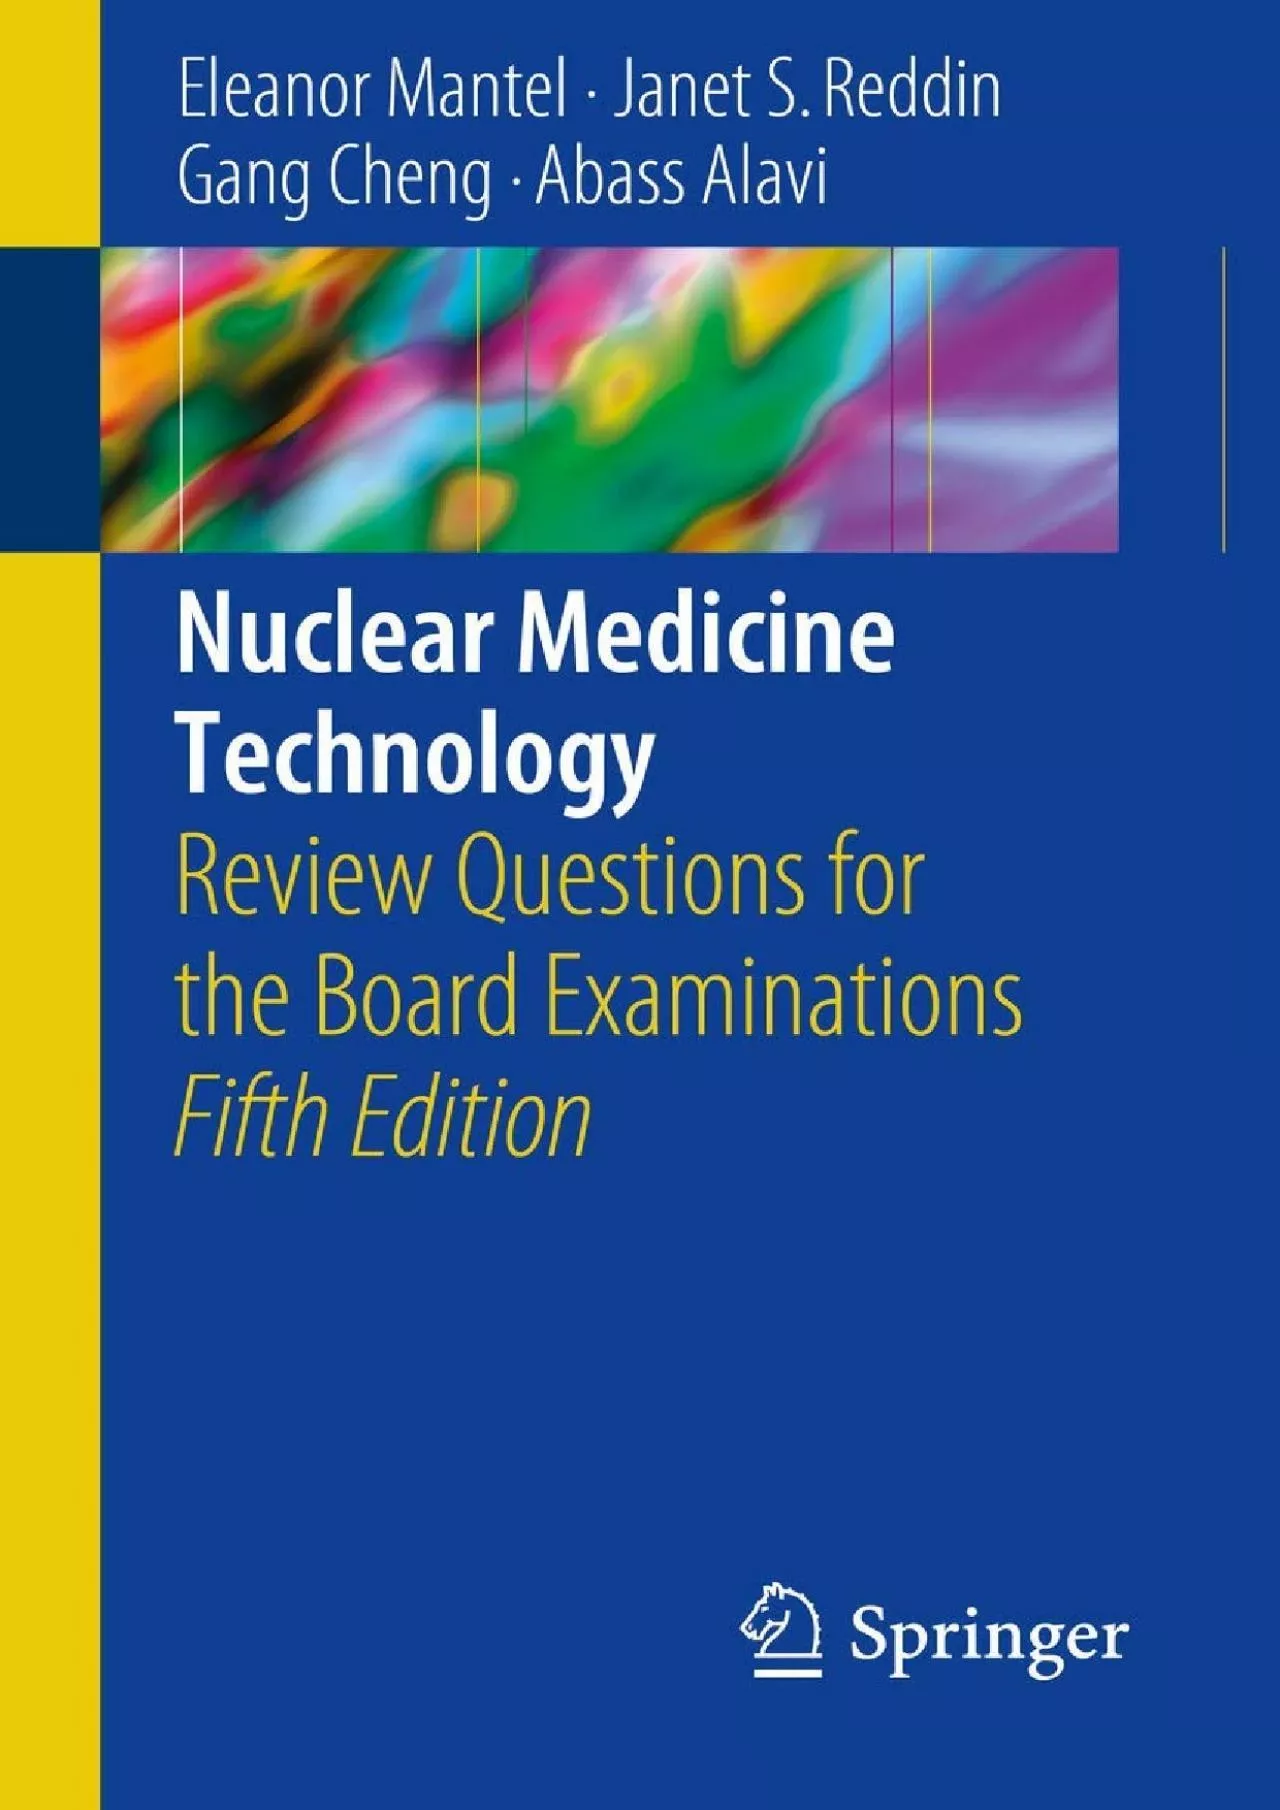 (DOWNLOAD)-Nuclear Medicine Technology: Review Questions for the Board Examinations